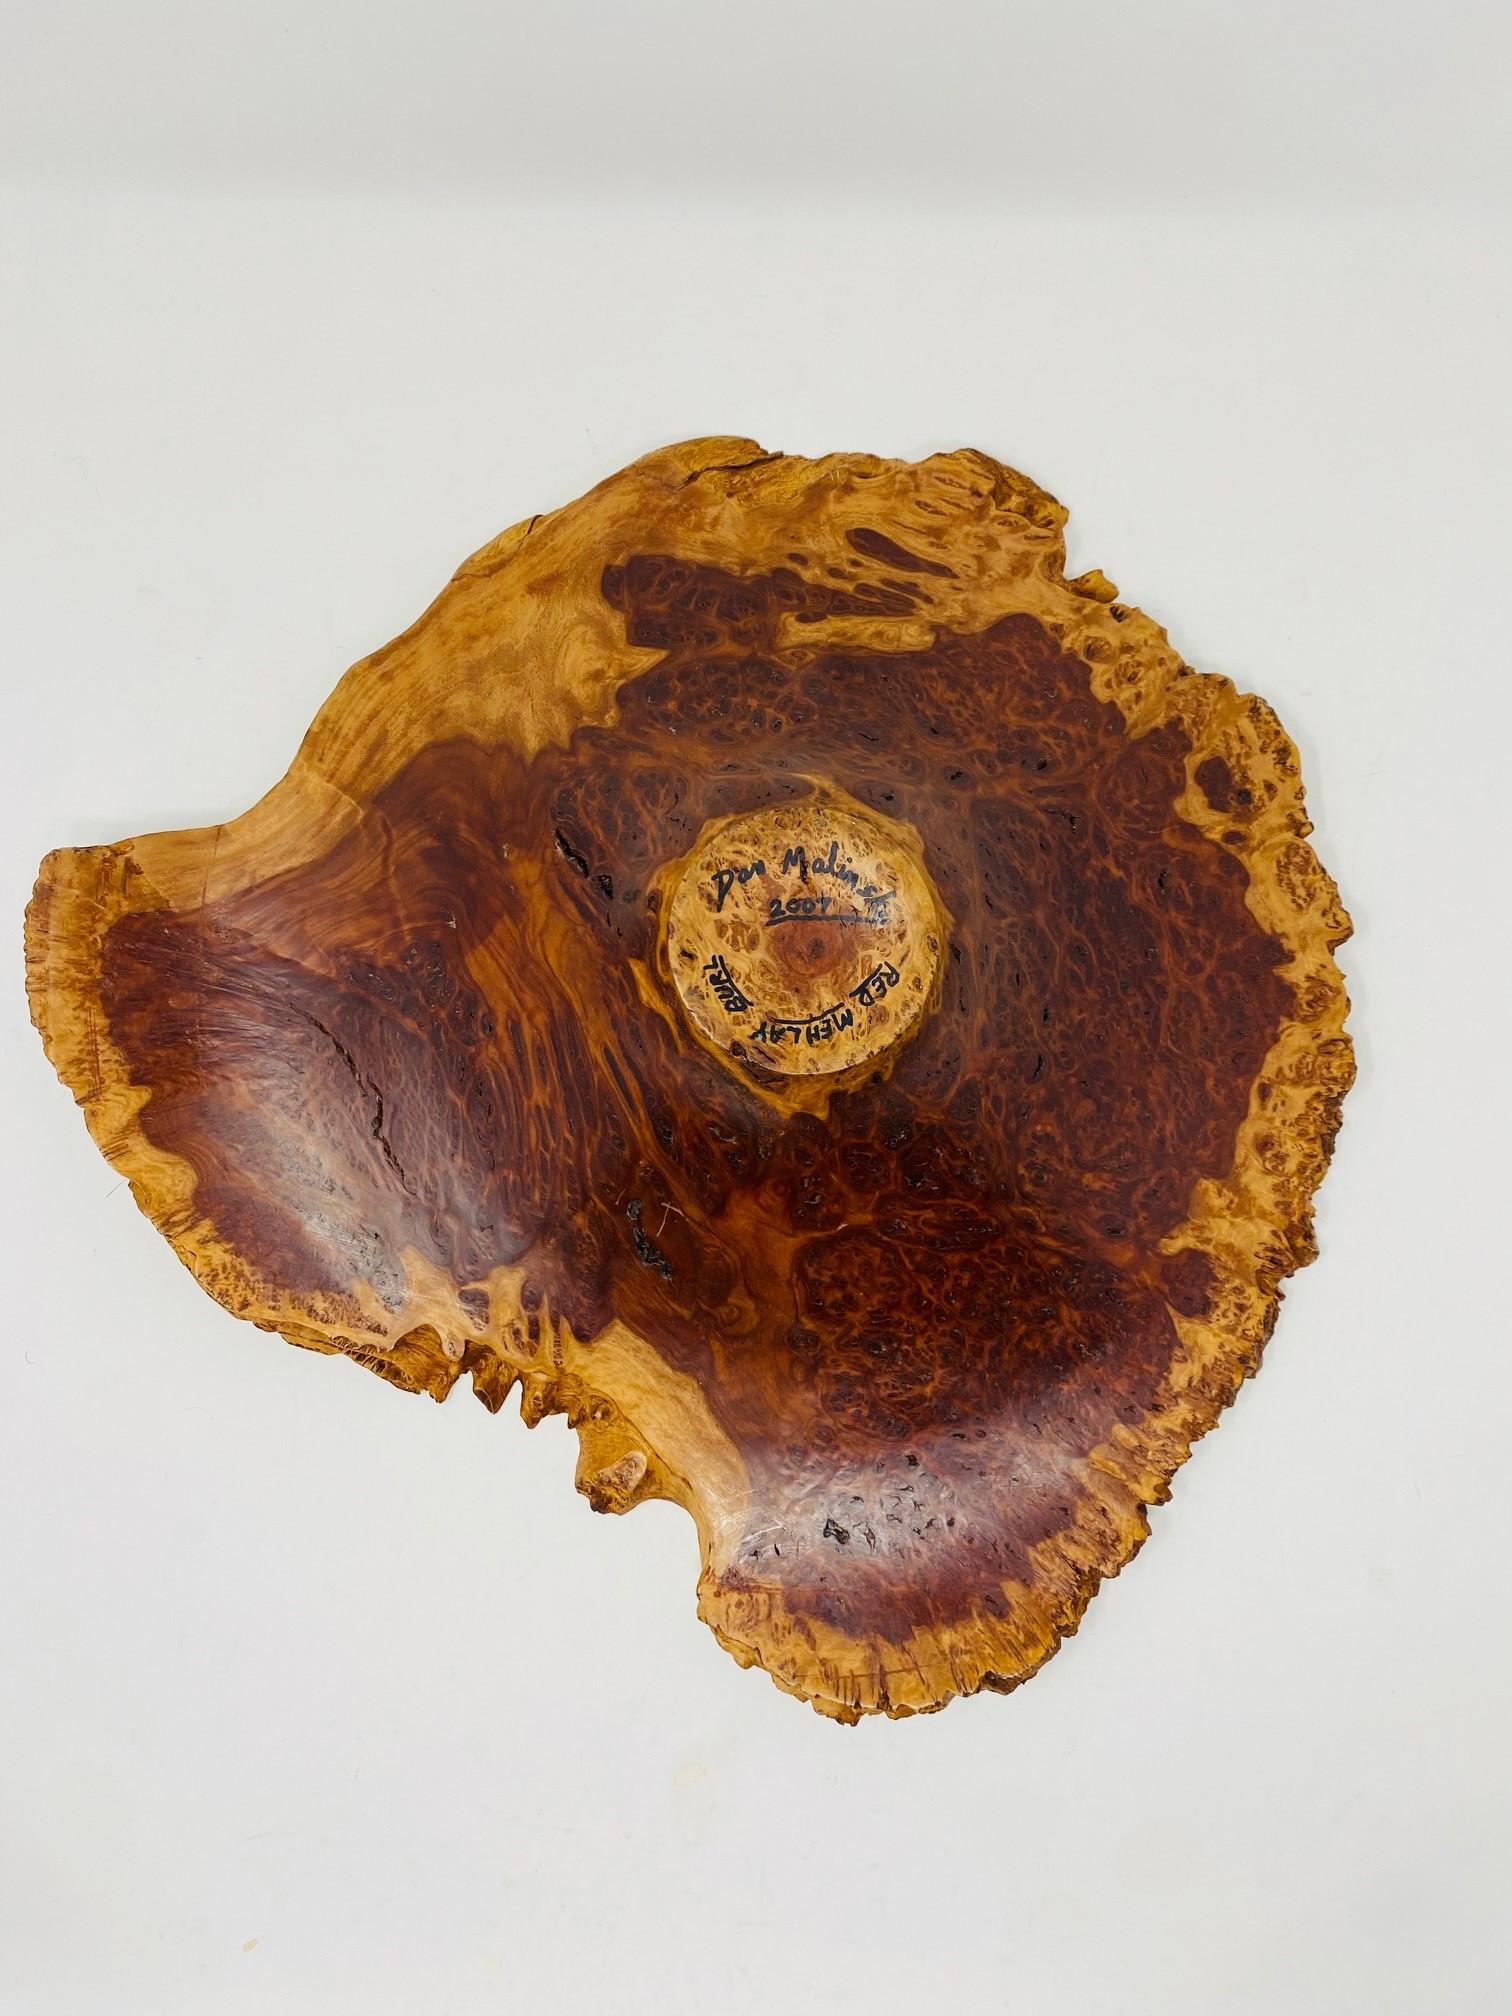 Incredibly sculptural live edge burl wood bowl.  This fantastic piece catapults to sculpture as it lines and natural structure elevate it to an object to feast on visually.  The wood patterns and raw edge add precise drama to the simple bowl shape.